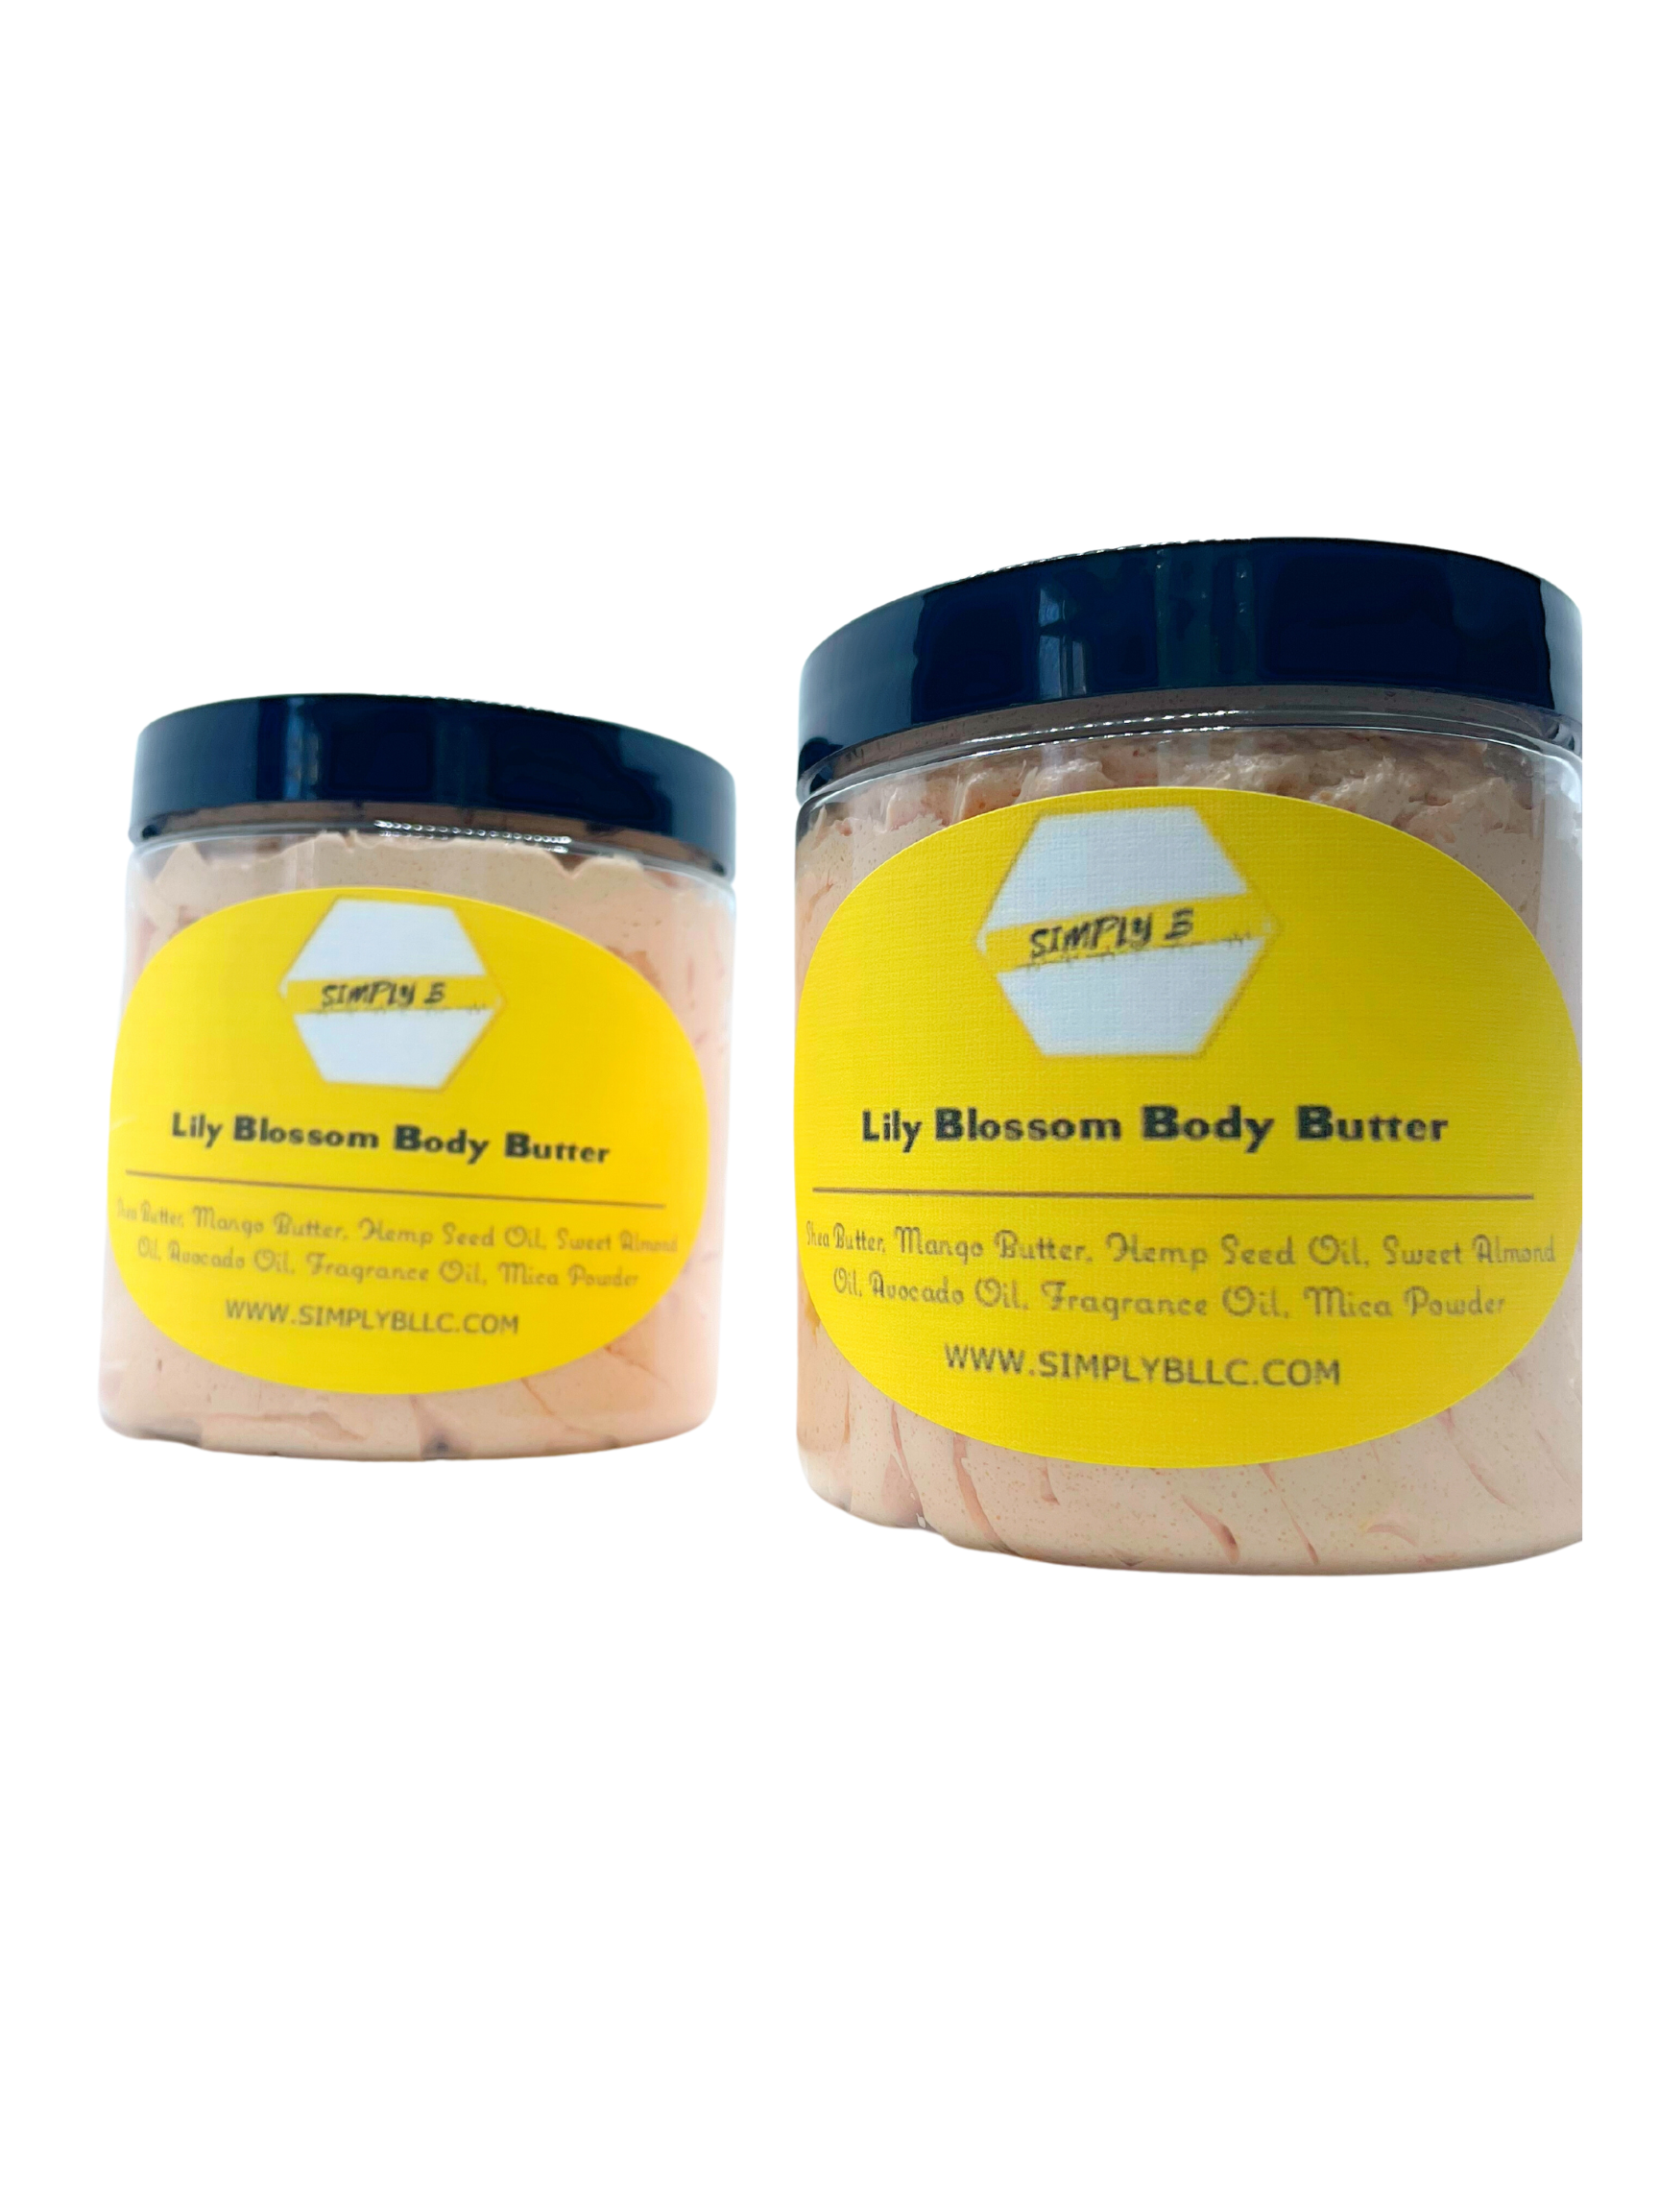 Lily Blossom Body Butter